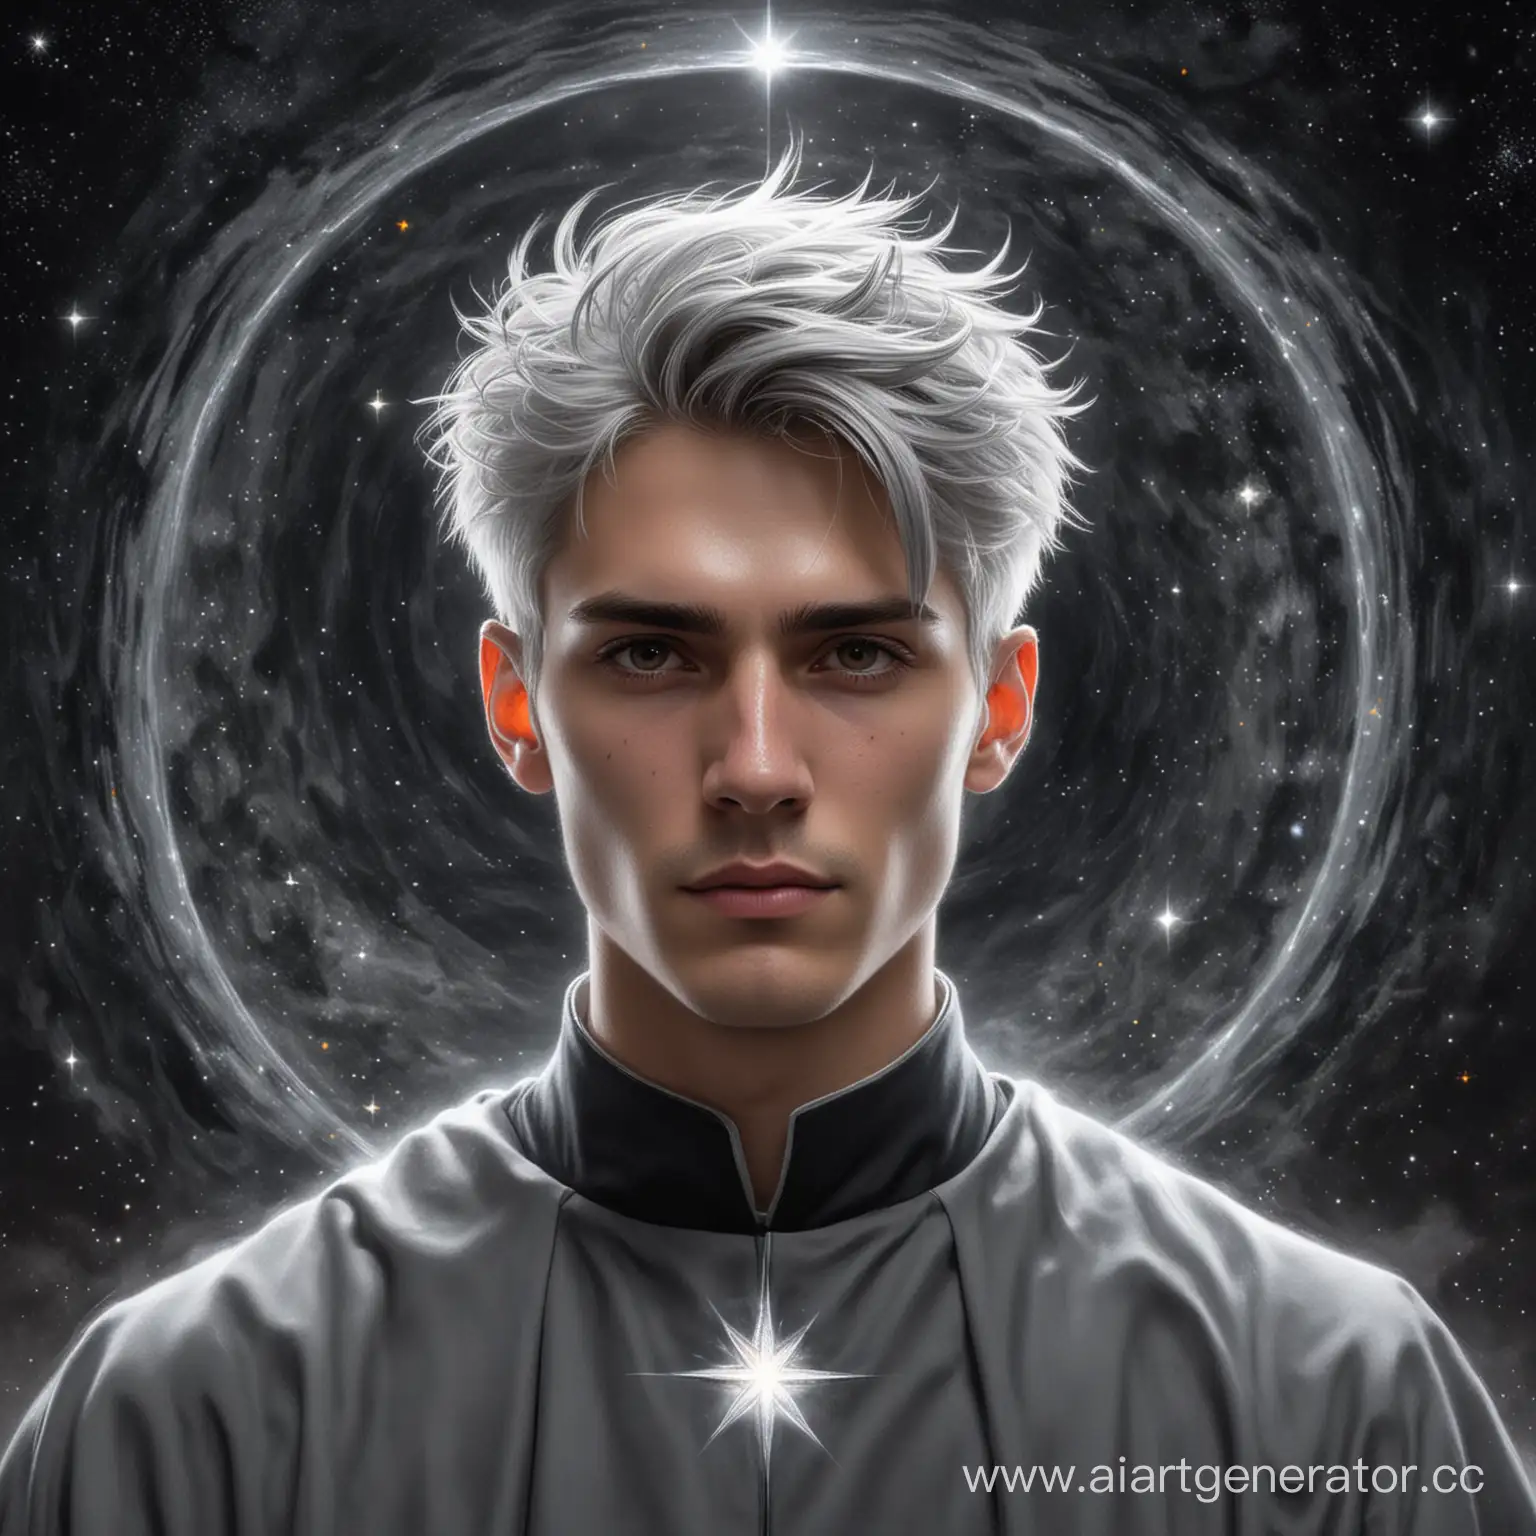 Cosmic-Portrait-of-a-Man-with-Marble-Skin-and-Silver-Hair